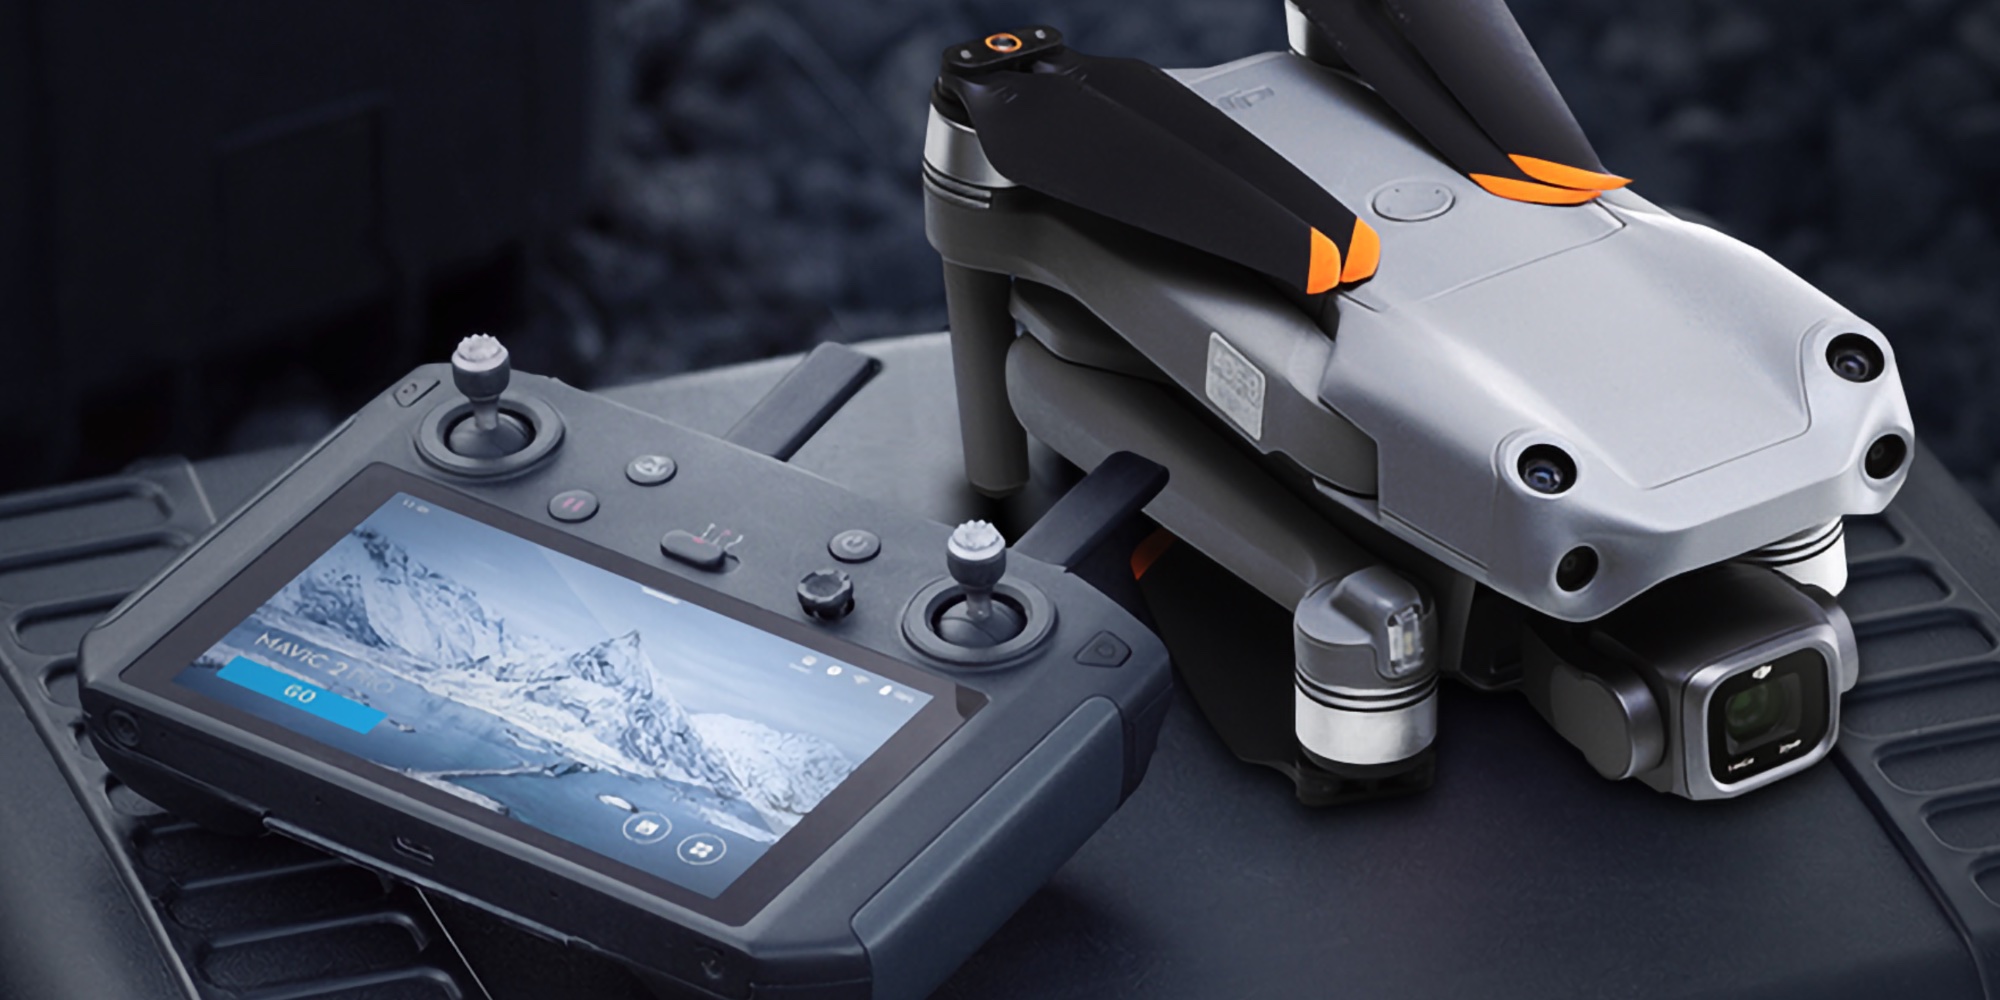 DJI releases new Air 2, Air 2S drones